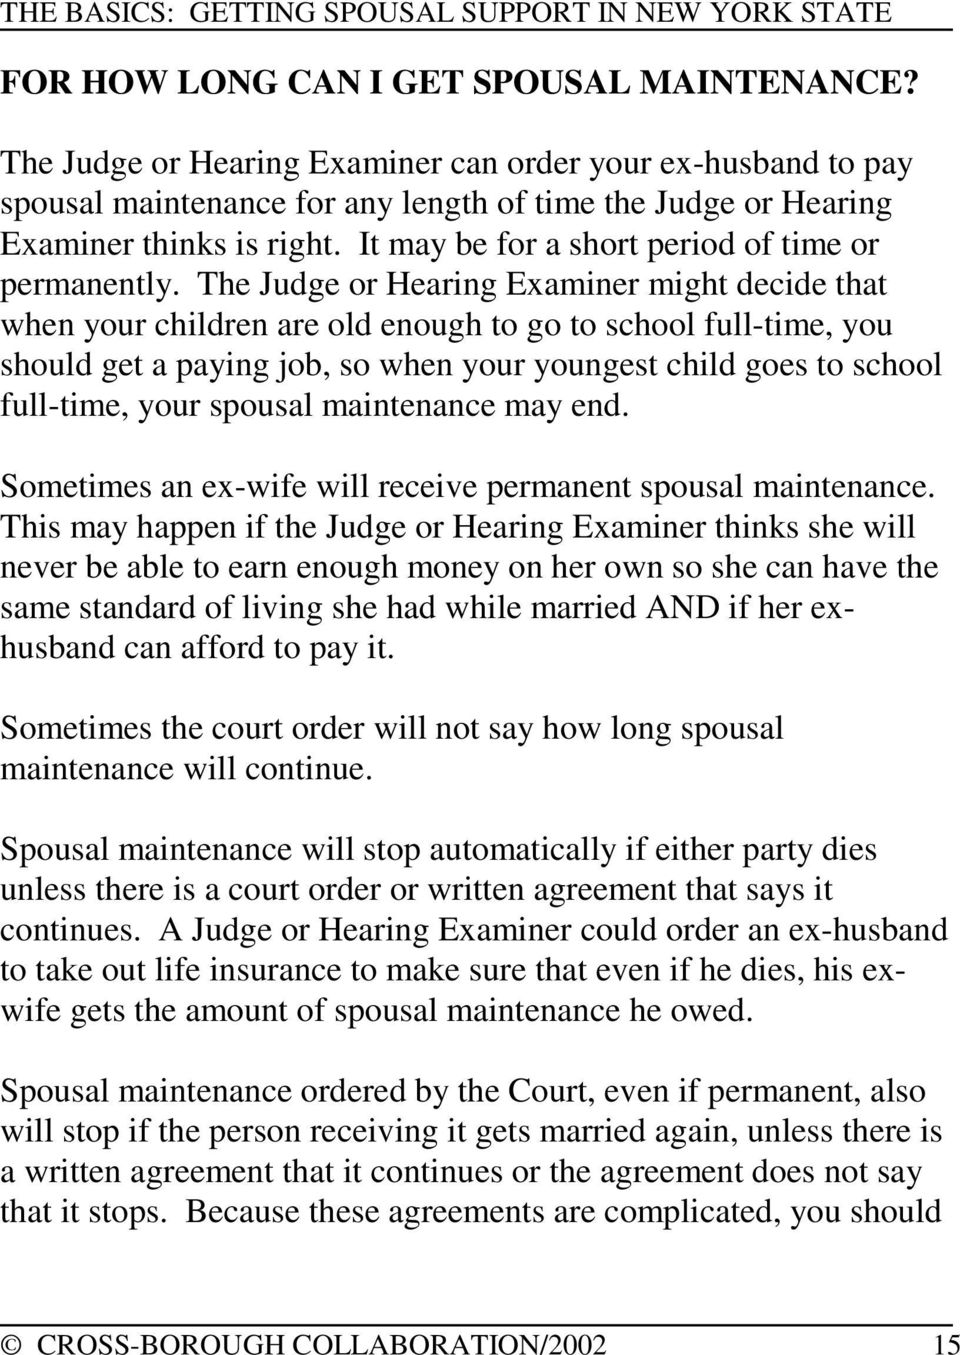 The Judge or Hearing Examiner might decide that when your children are old enough to go to school full-time, you should get a paying job, so when your youngest child goes to school full-time, your